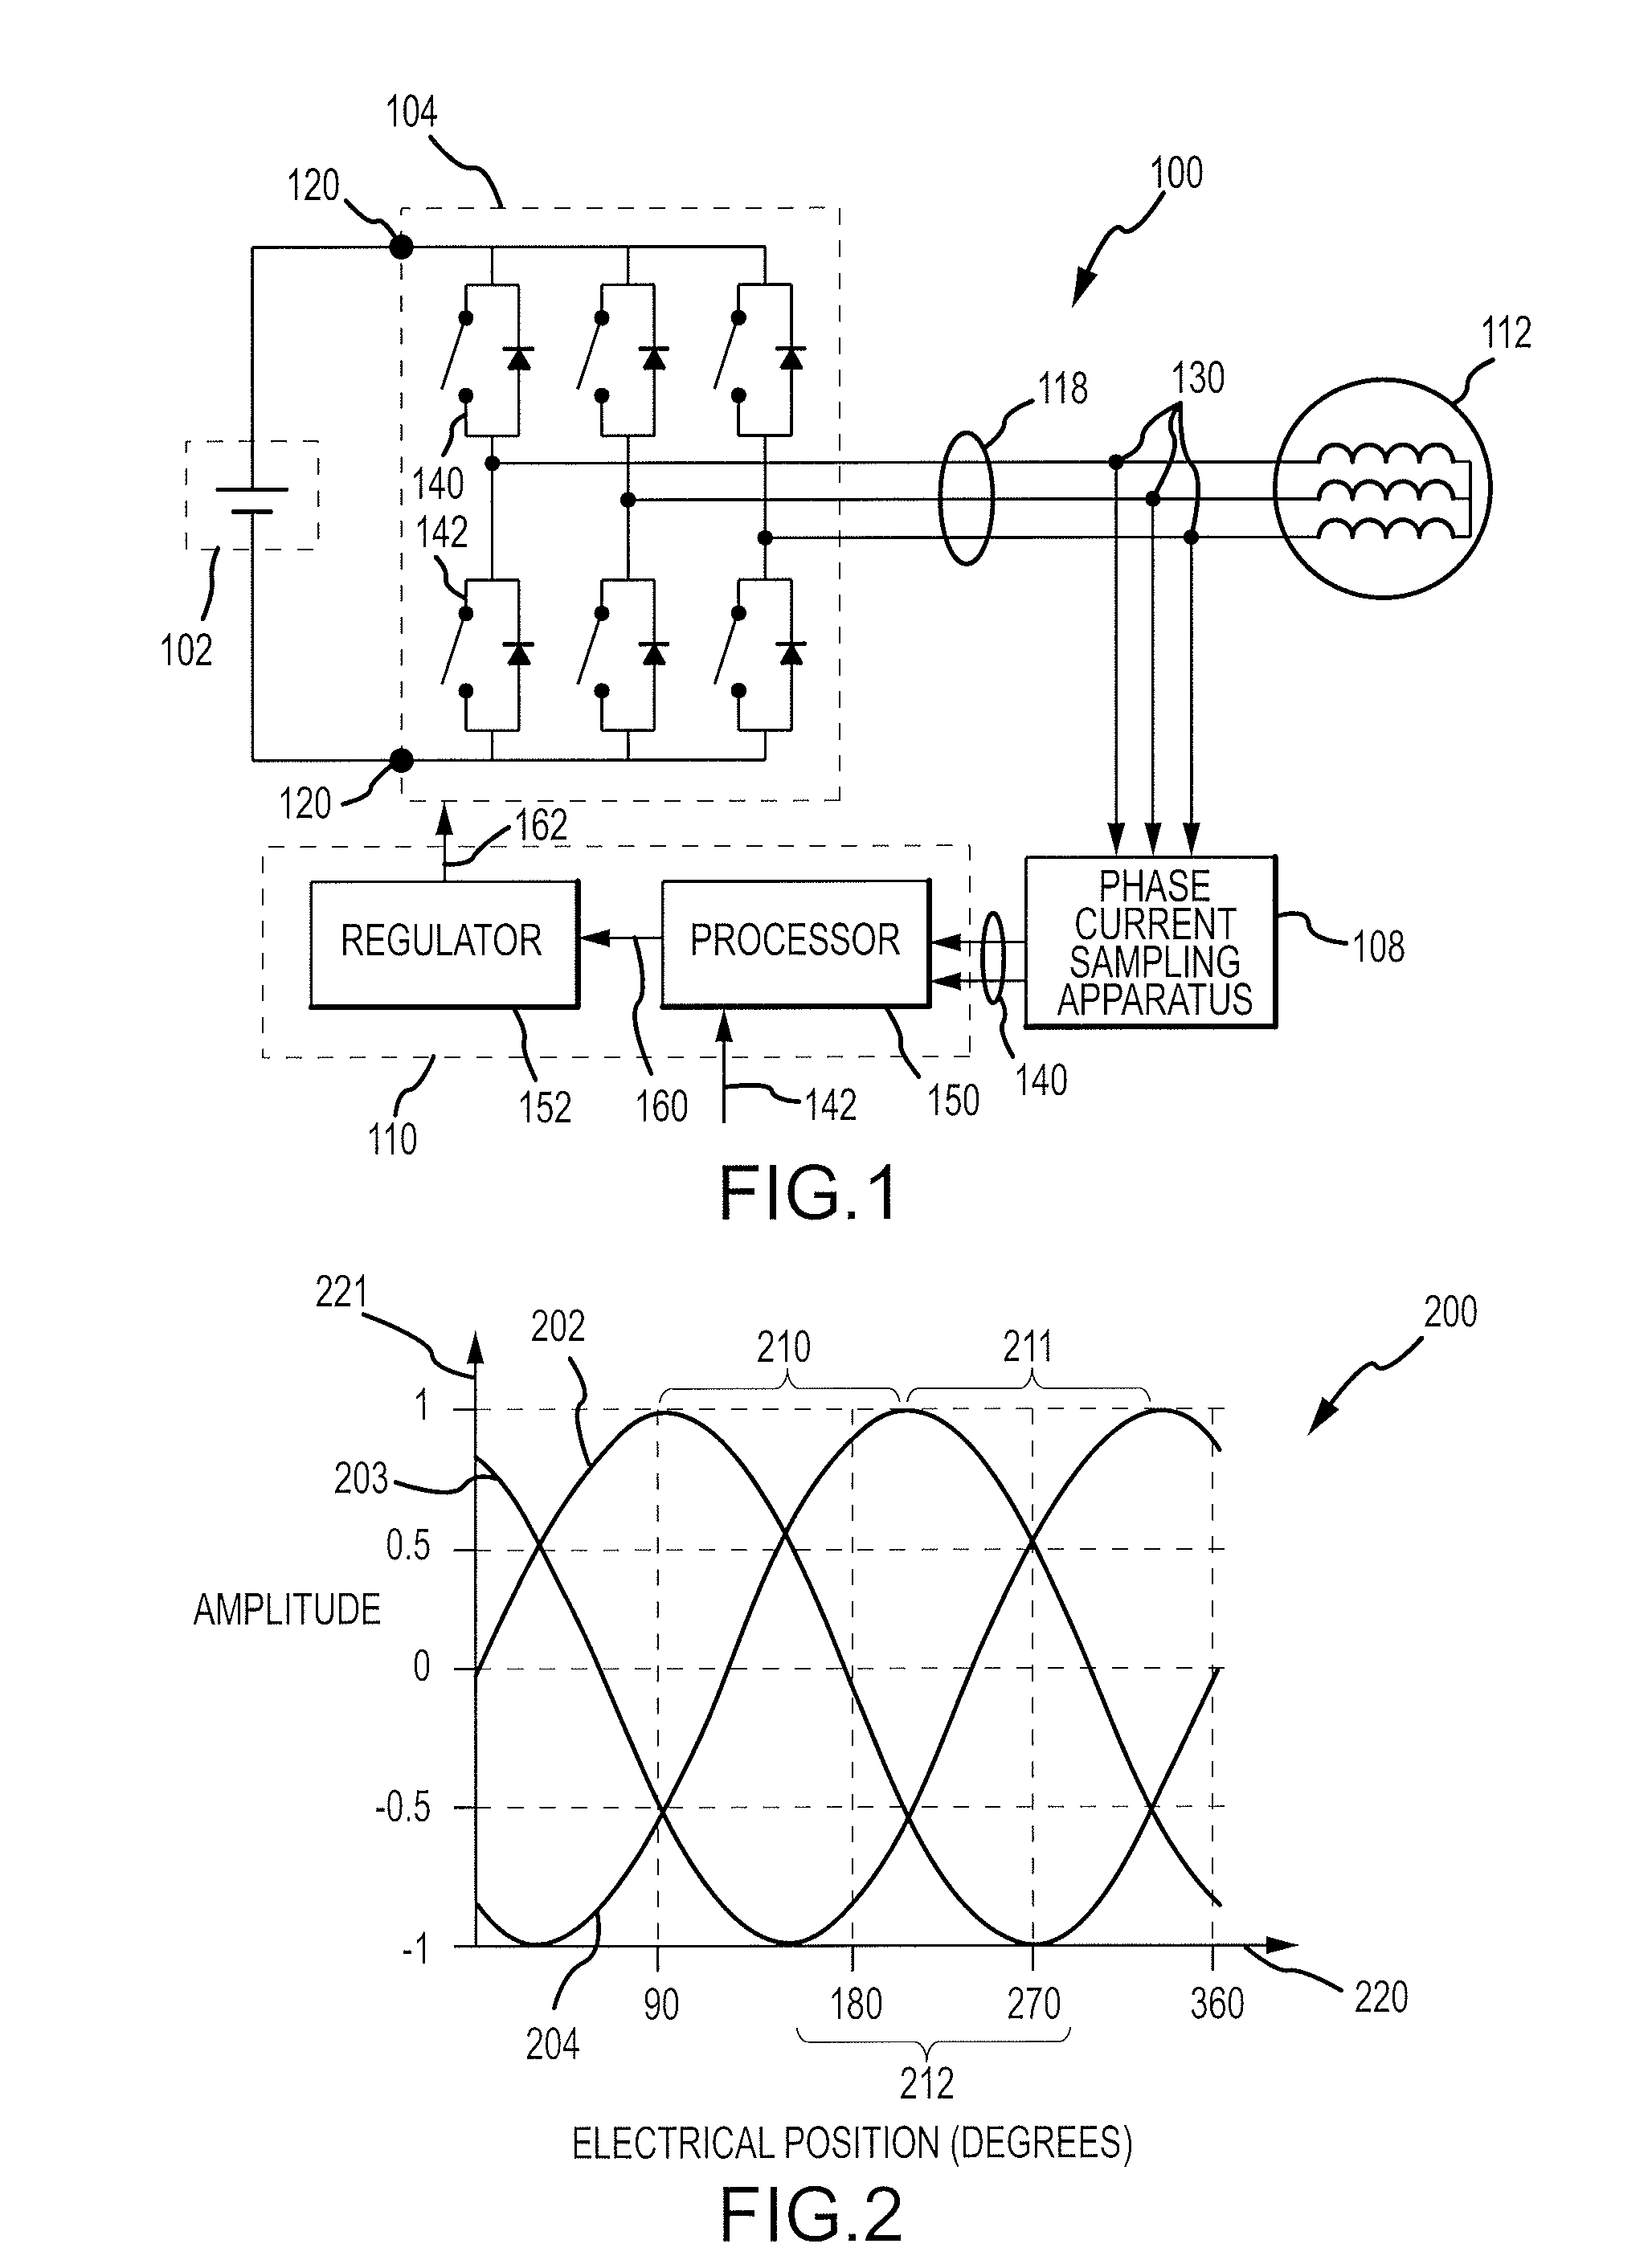 Phase current sampling and regulating apparatus and methods, and electric motor drive systems